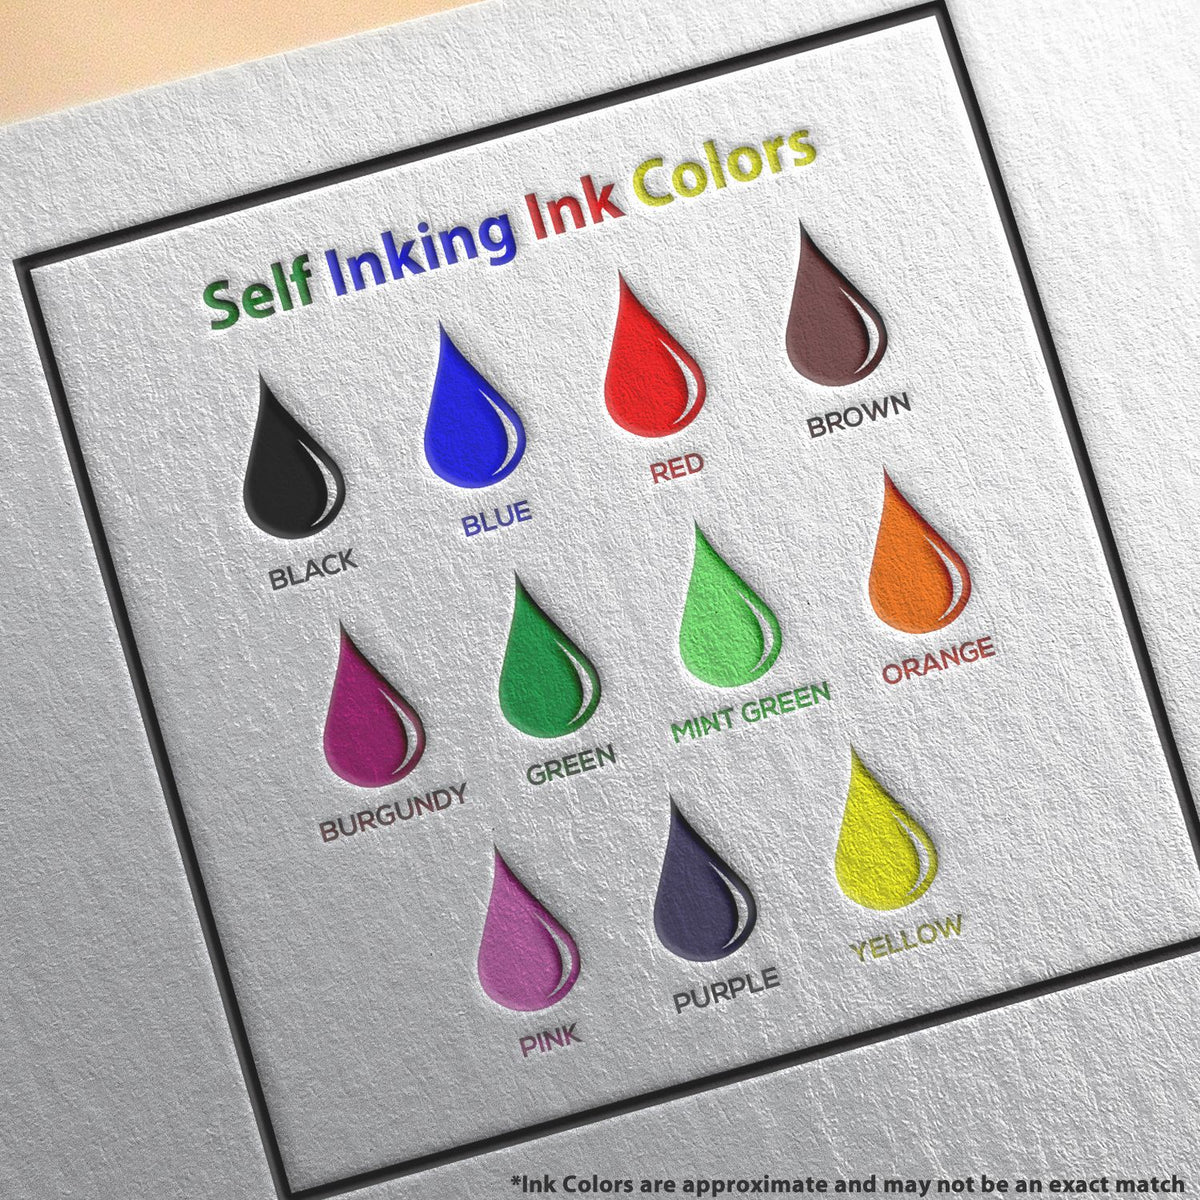 A picture showing the different ink colors or hues available for the Self-Inking Rectangular Florida Notary Stamp product.